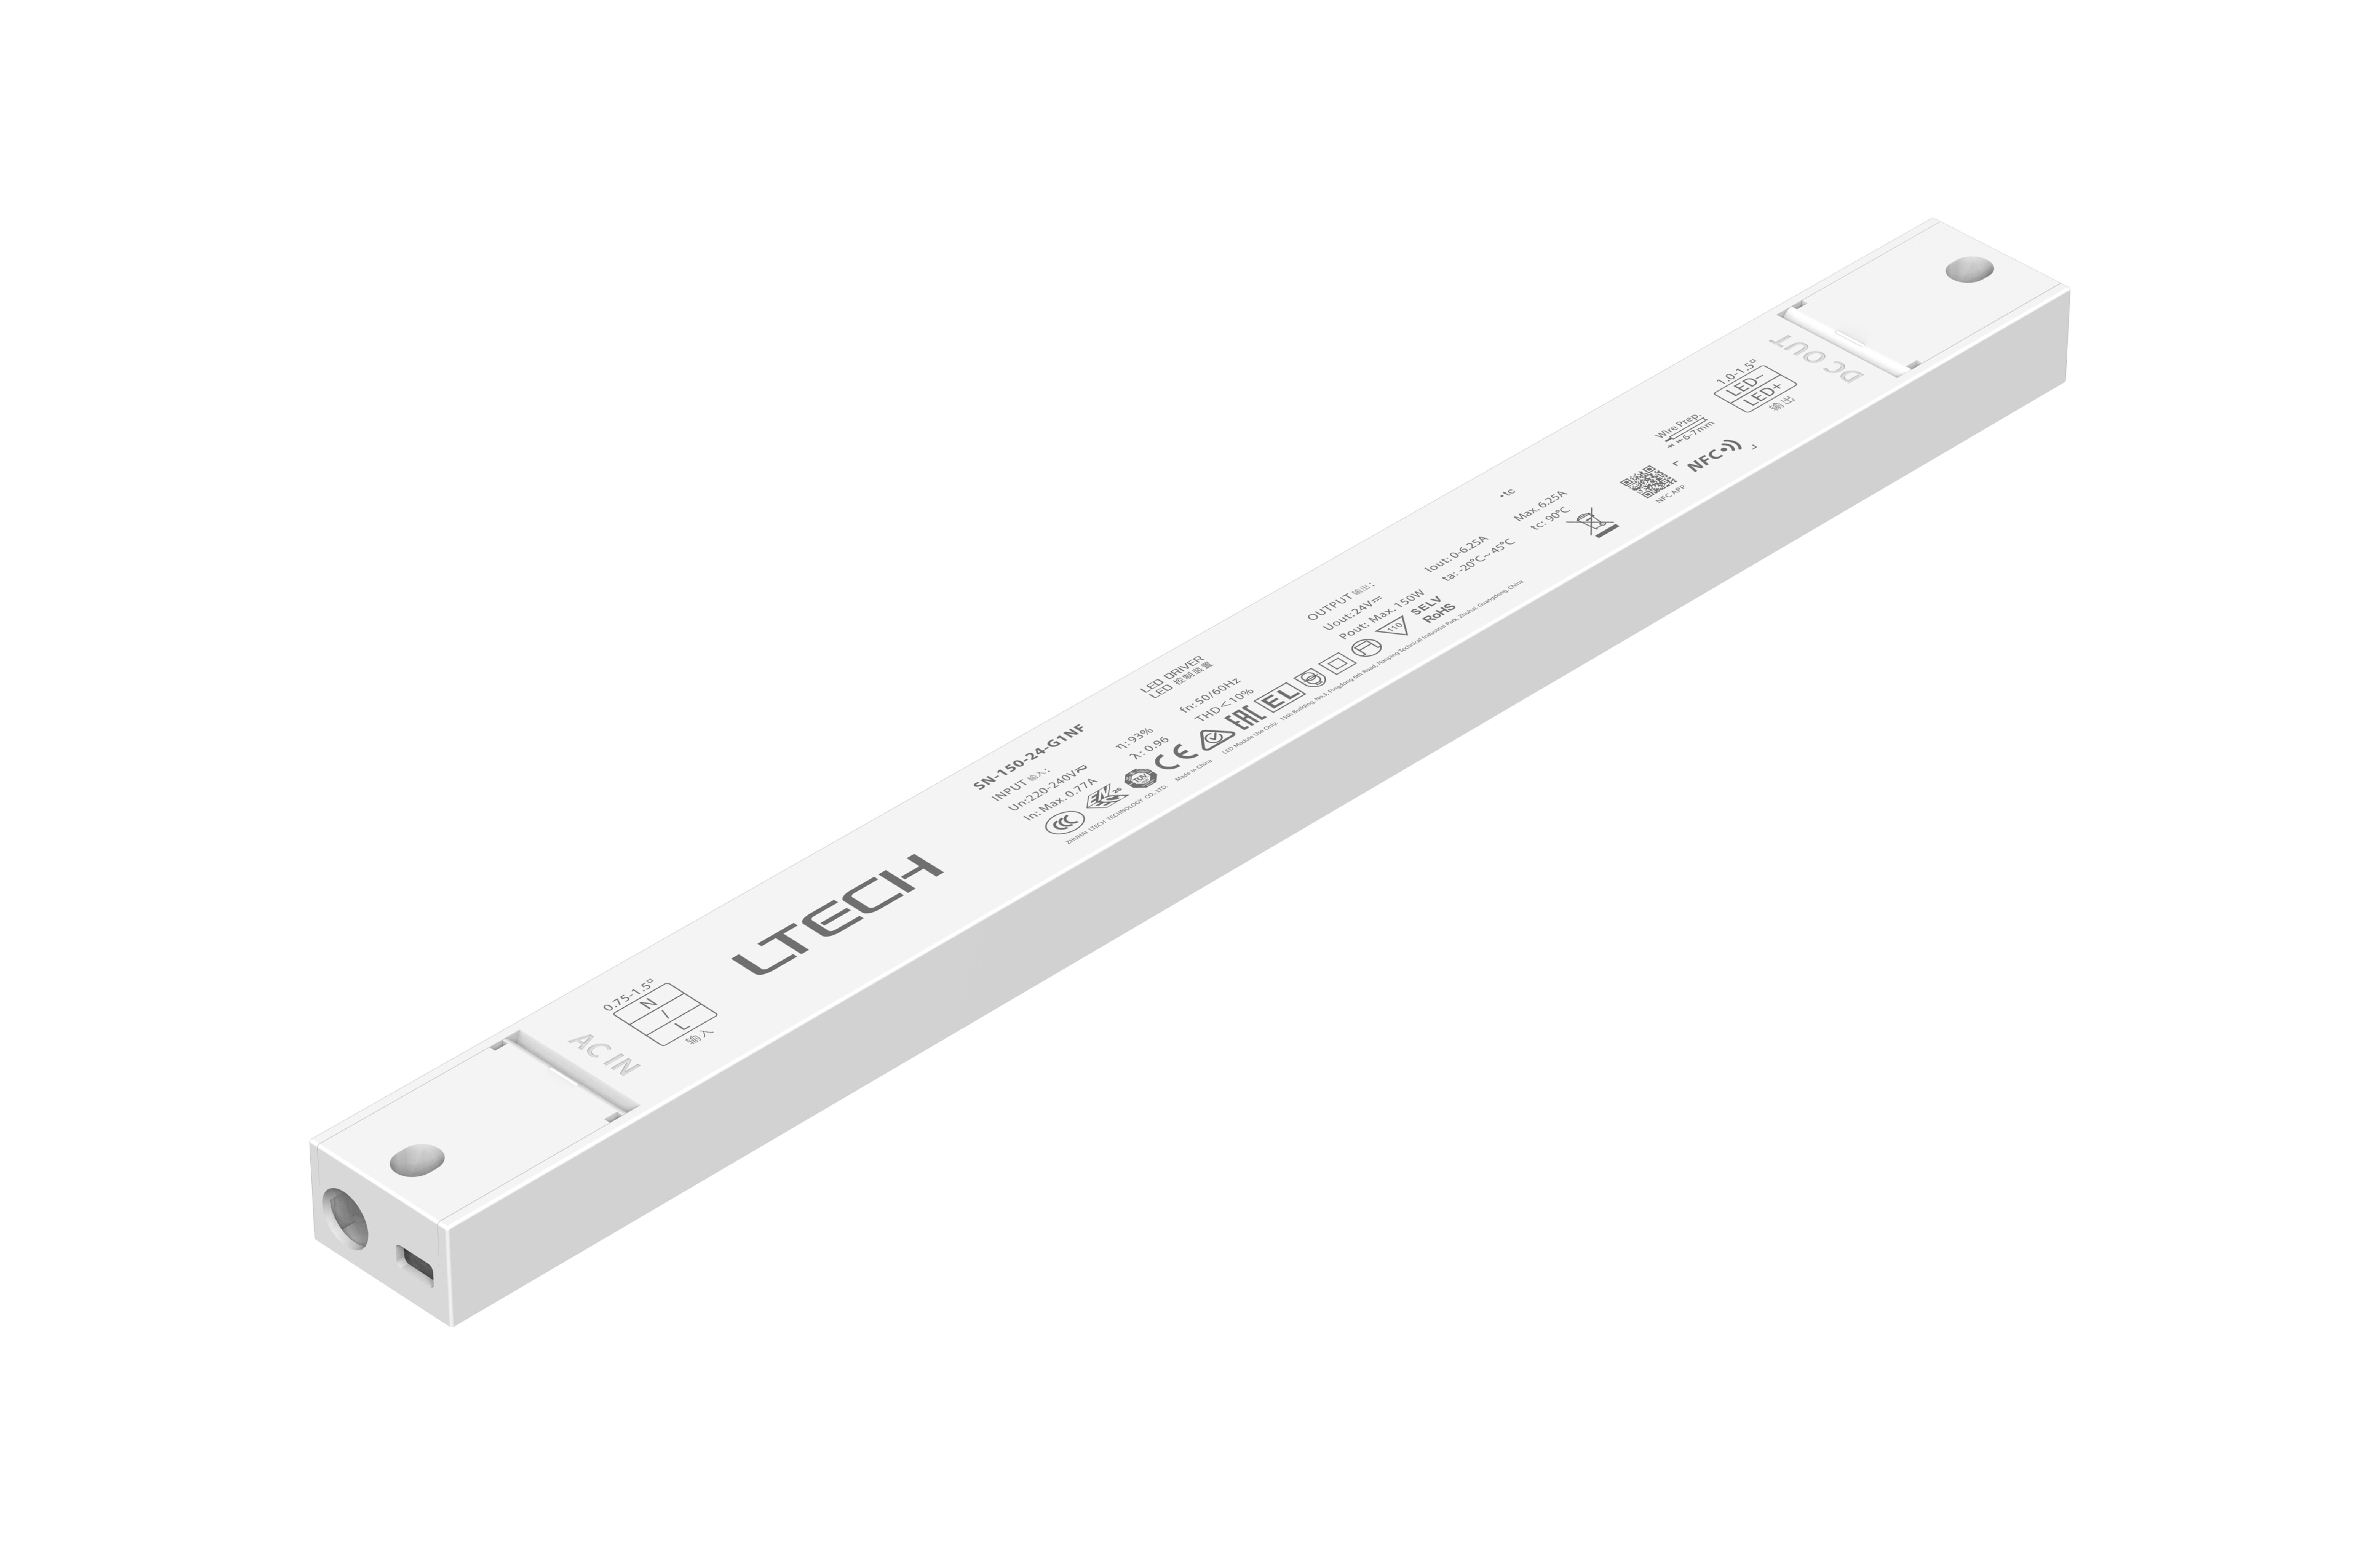 SN-150-24-G1NF-NFC  Intelligent Constant Current NFC ON/OFF LED Driver;  150W; 24VDC 6.25A ; 220-240Vac; IP20; 5yrs Warrenty.